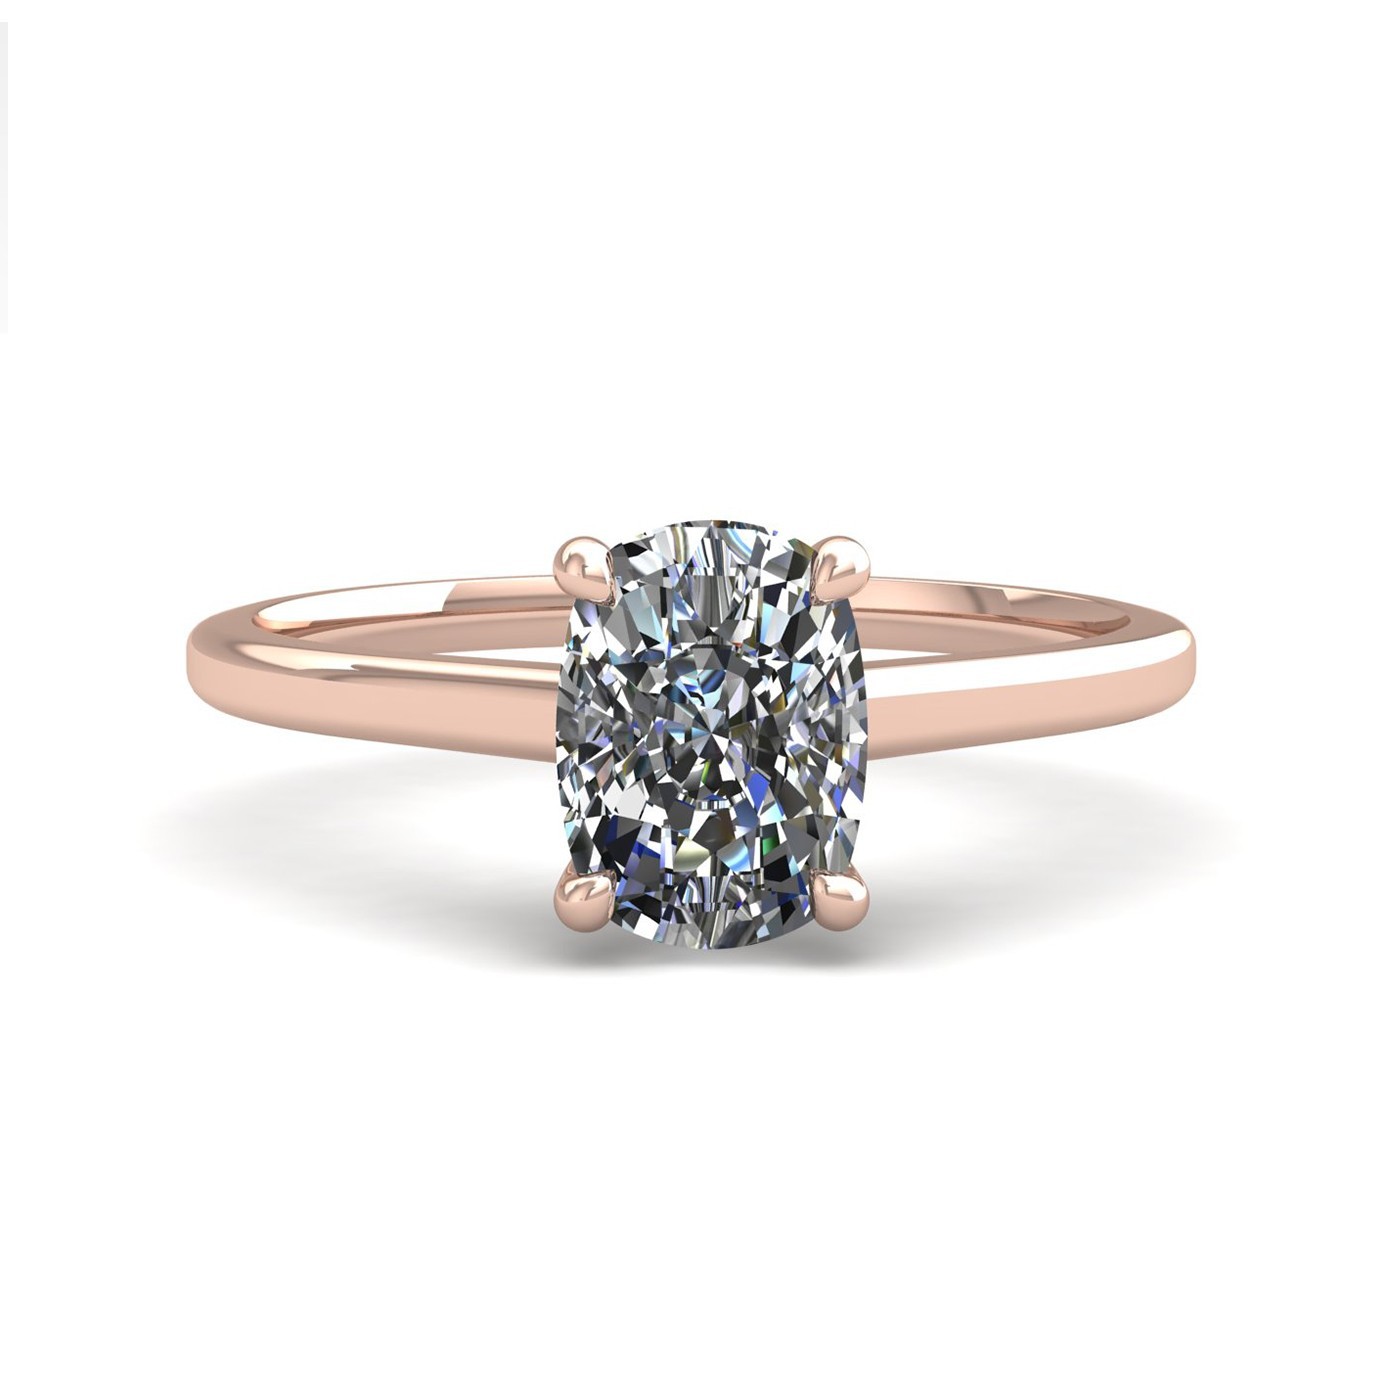 18k rose gold 0,80 ct 4 prongs solitaire elongated cushion cut diamond engagement ring with whisper thin band Photos & images